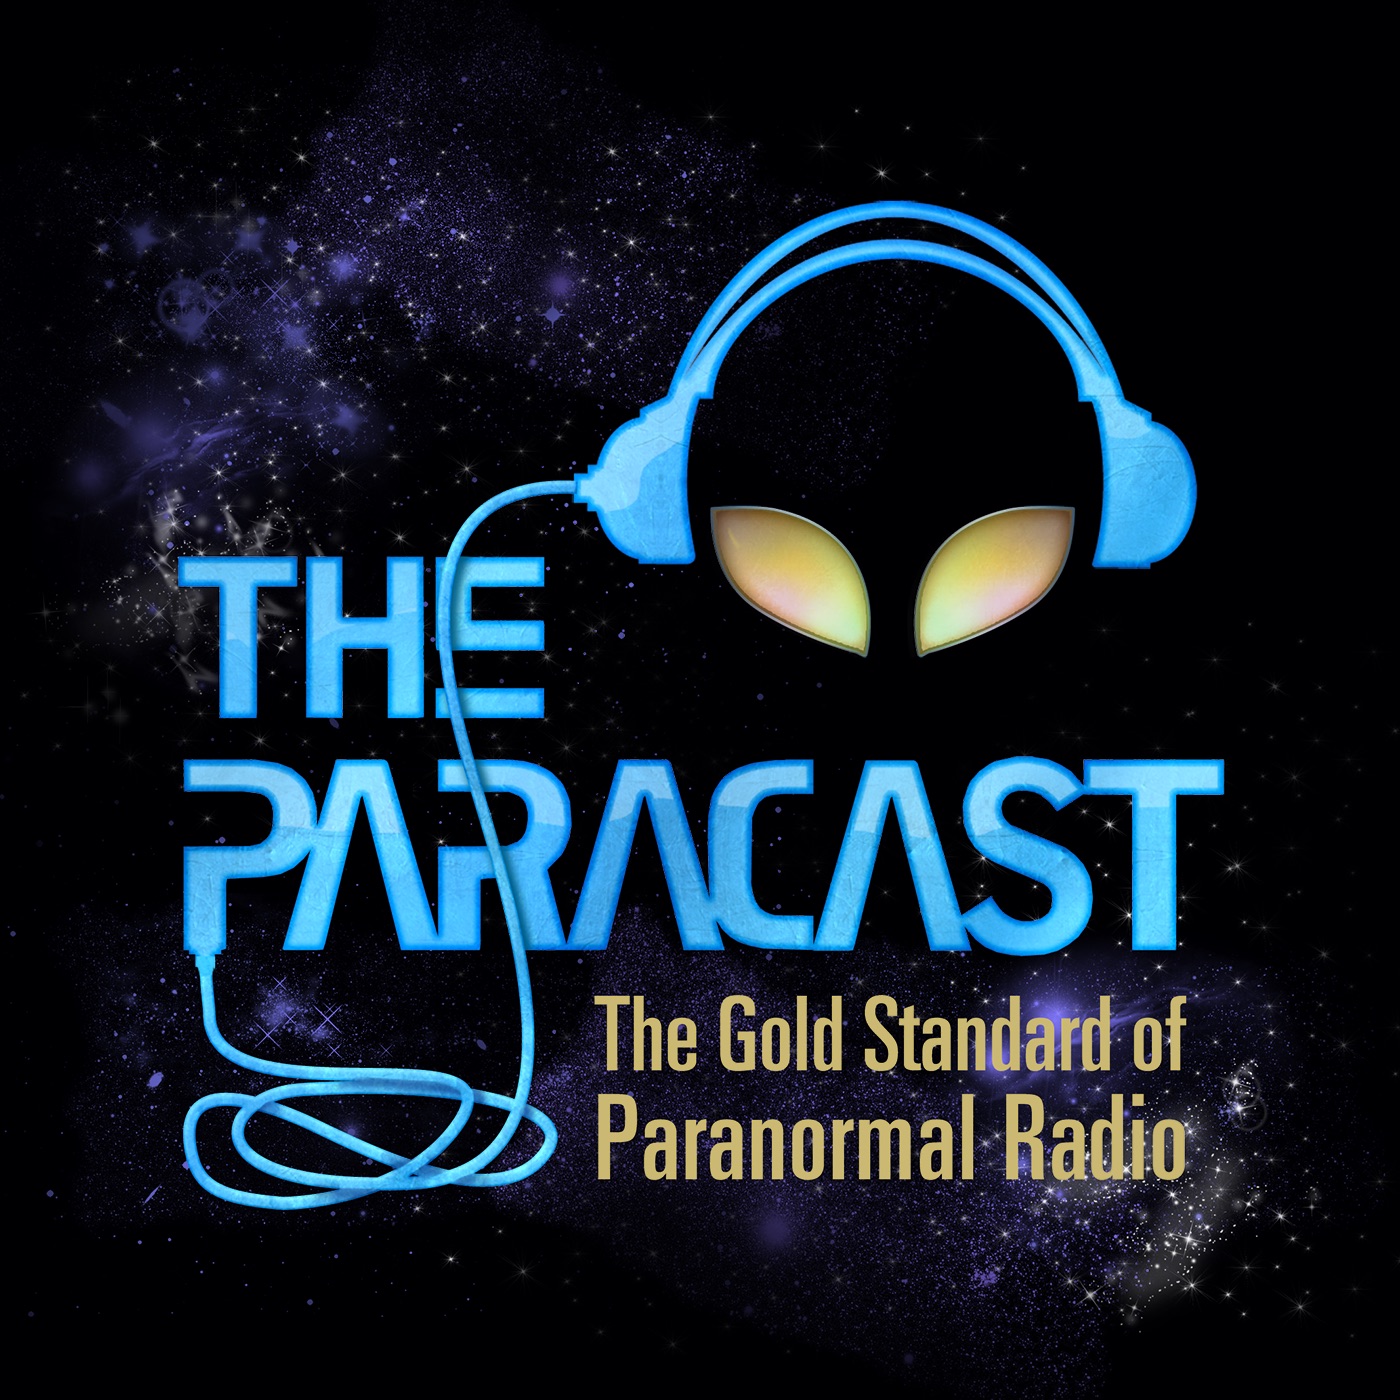 The Paracast -- The Gold Standard of Paranormal Radio podcast